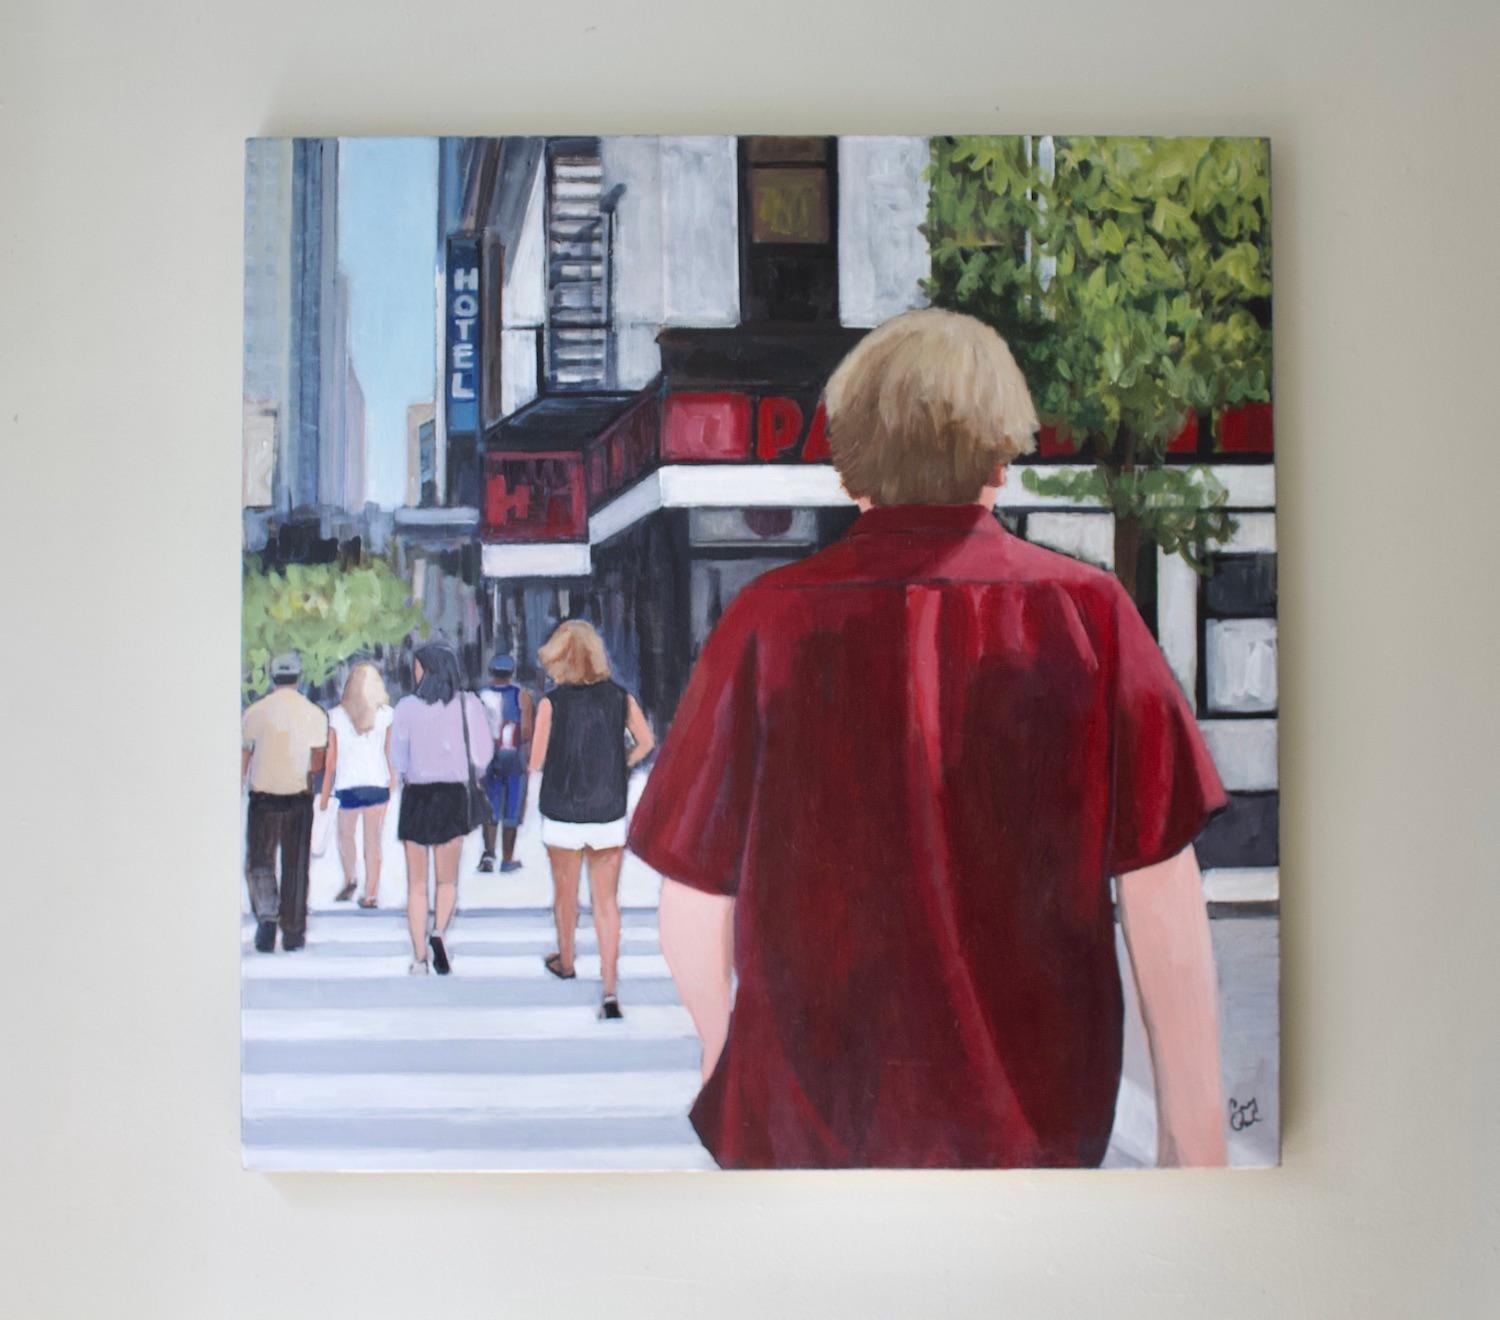 <p>Artist Comments<br>Artist Carey Parks shares a striking viewpoint of a busy day at an urban crosswalk. She illustrates numerous people hurriedly crossing the impressionist cityscape. 